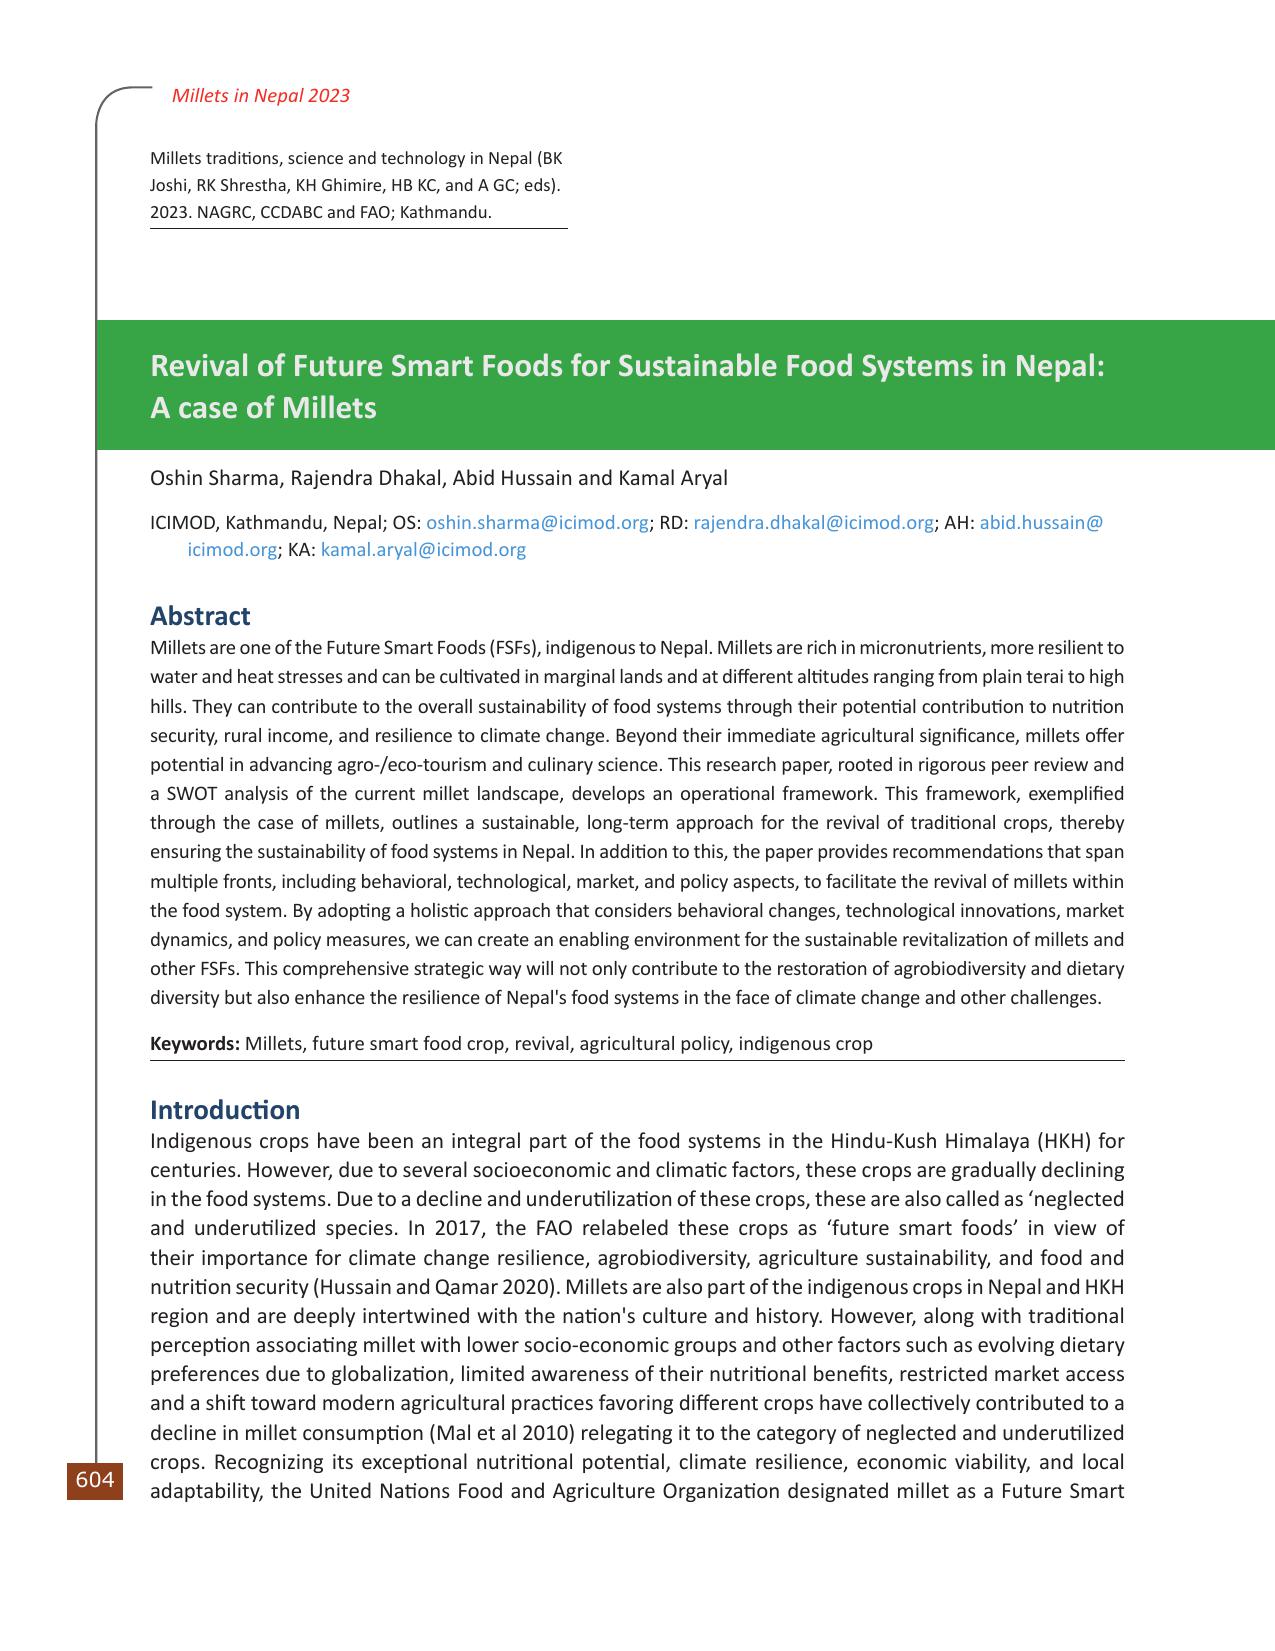 Revival of future smart foods for sustainable food systems in Nepal: A case of millets